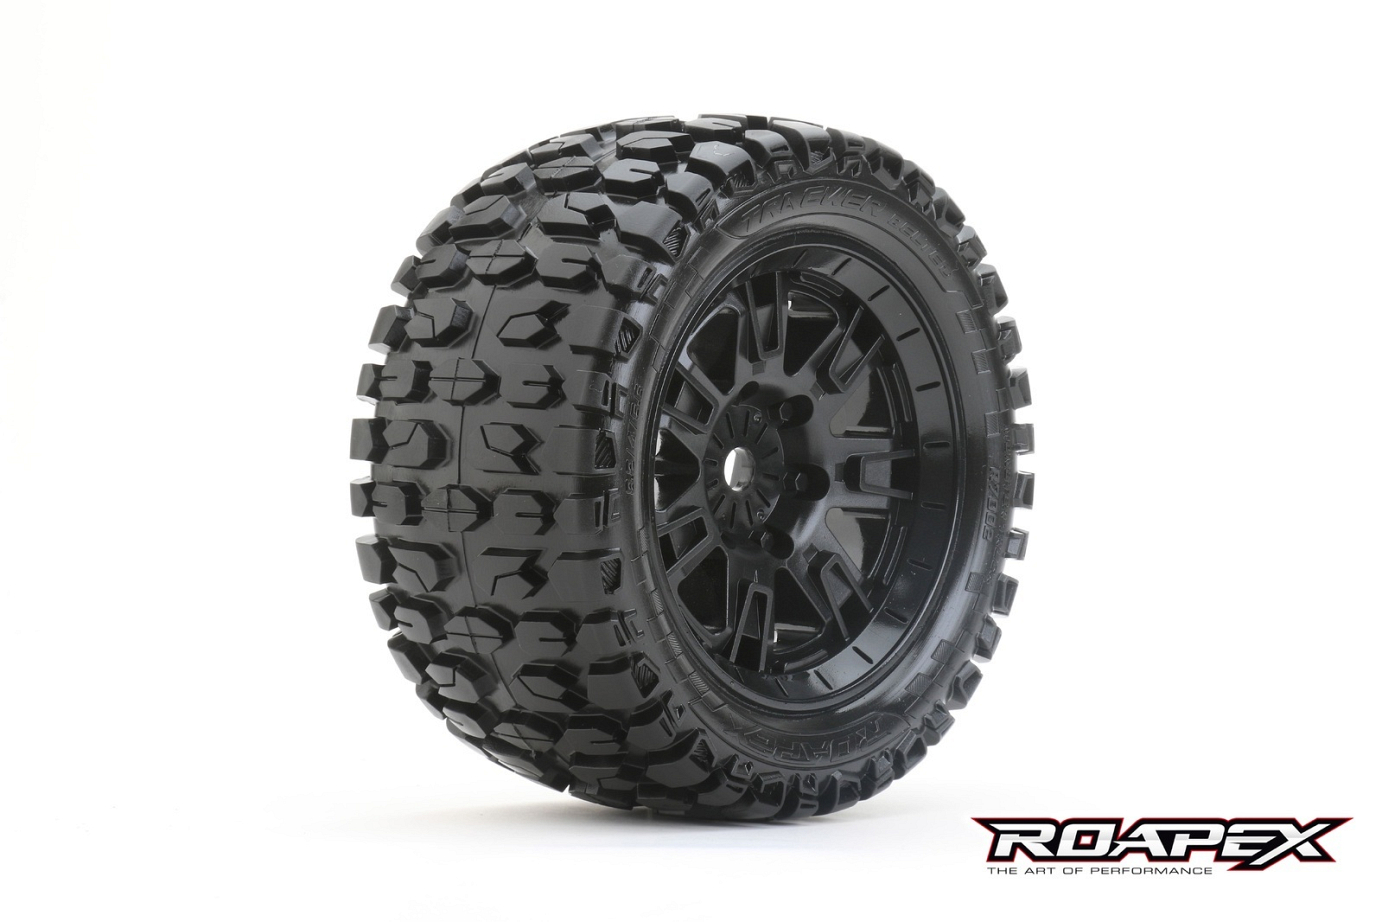 TRACKER BELTED ARRMA KRATON 8S MT TRUCK TIRE BLACK WHEEL WITH 24MM HEX MOUNTED